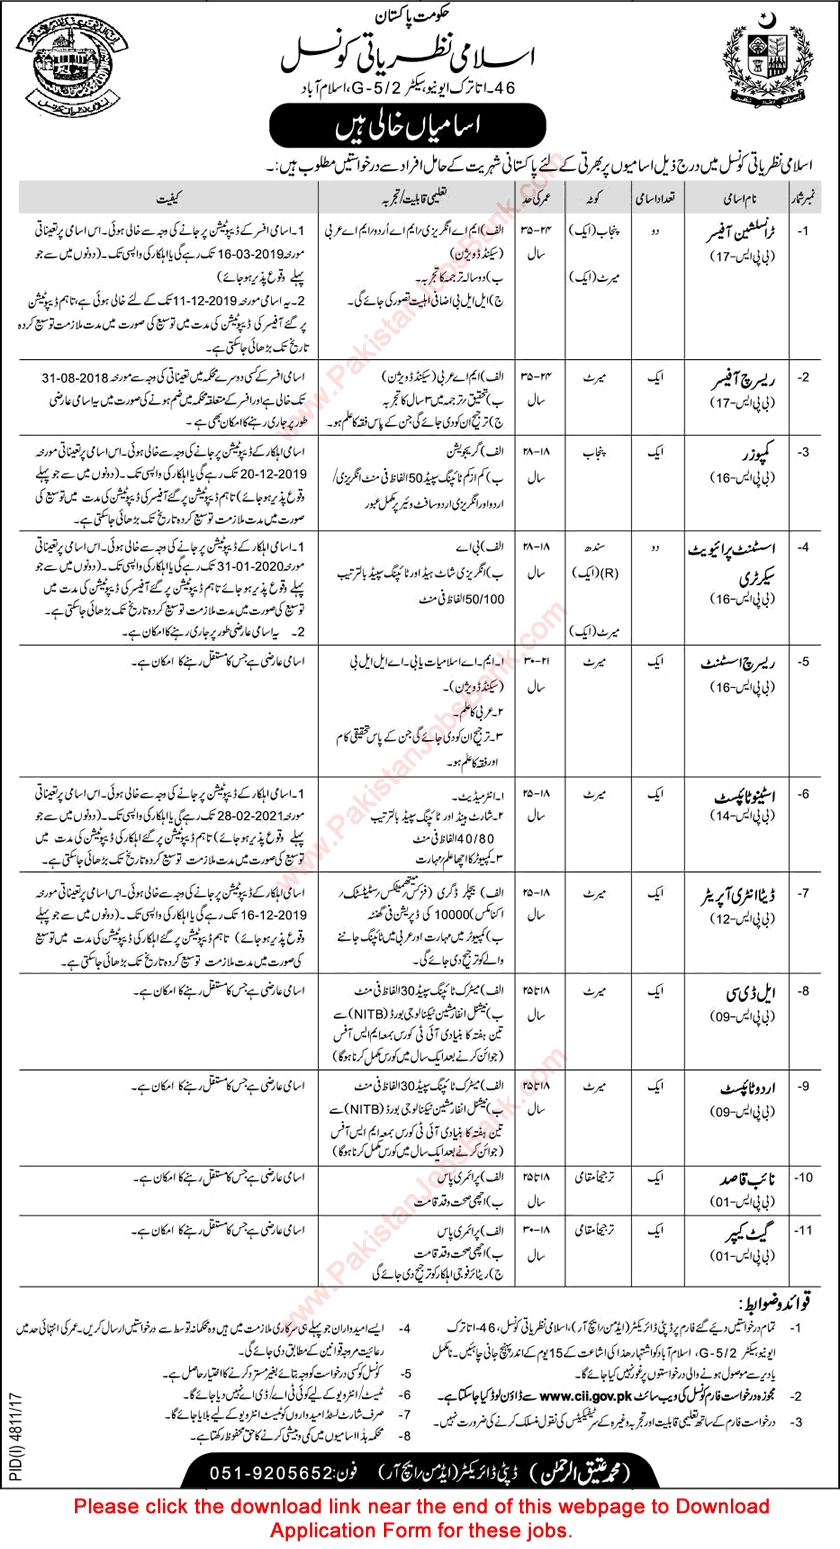 Council of Islamic Ideology Islamabad Jobs 2018 March Application Form Download CII Latest